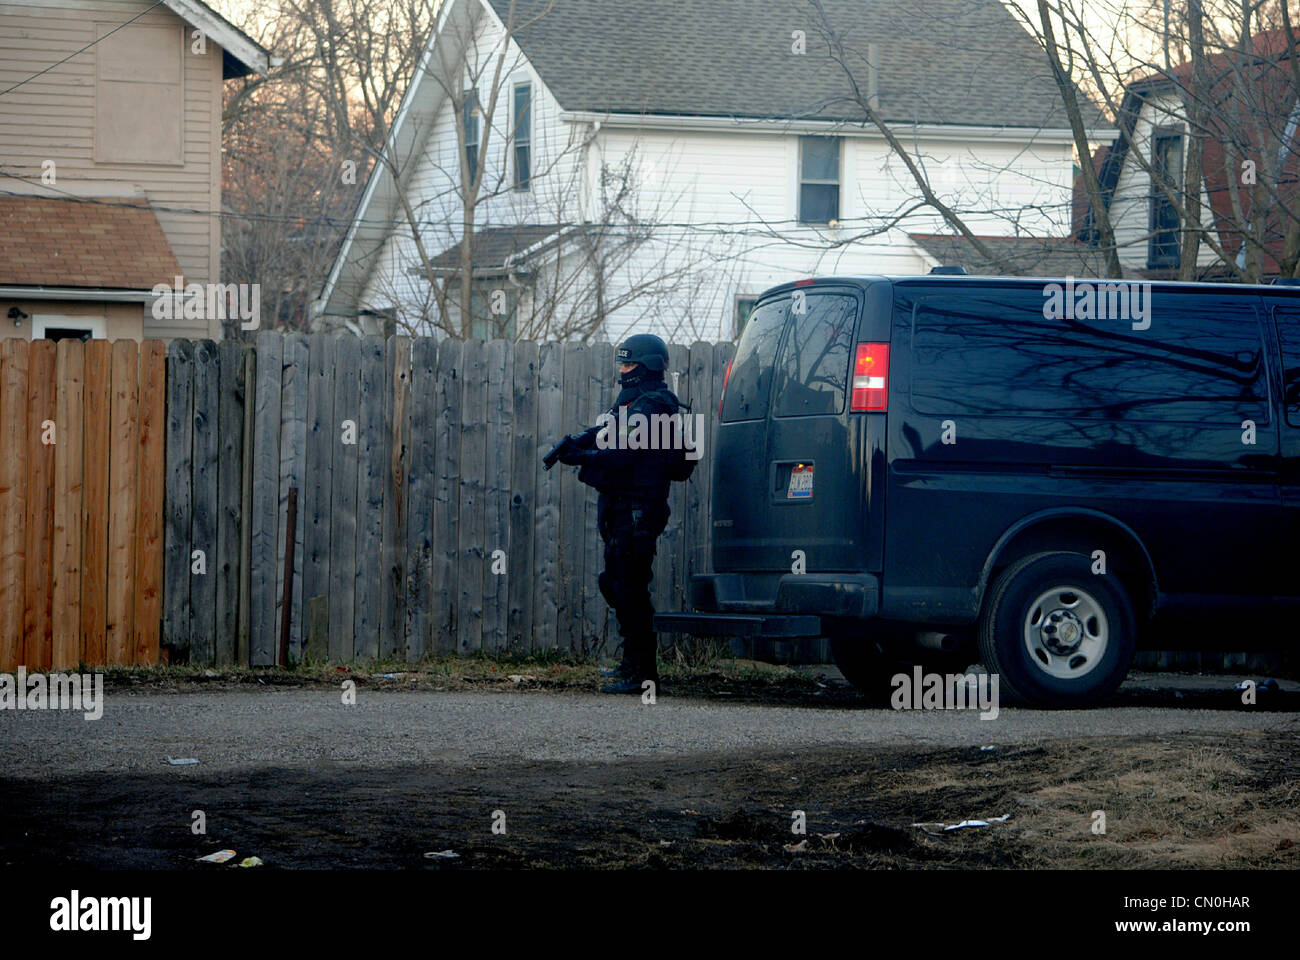 Swat officer,secures back entrance,during a drug raid,fully equipped with weapons. Stock Photo